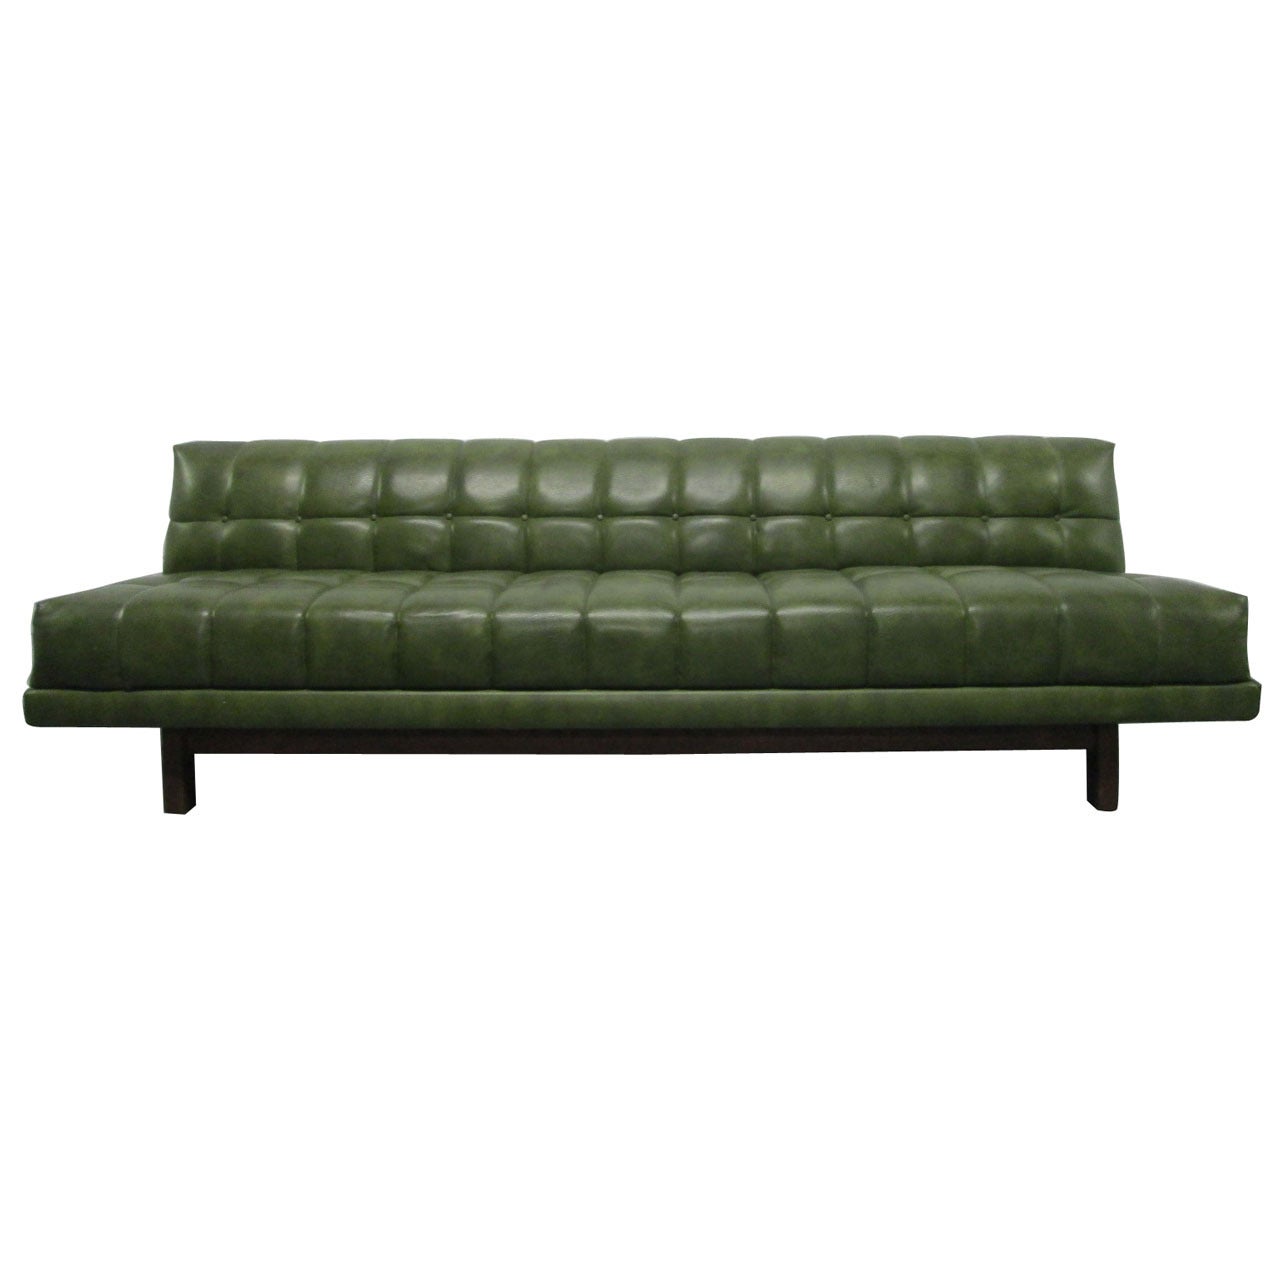 Mid Century Modern Tufted Armless Sofa Attributed to Harvey Probber